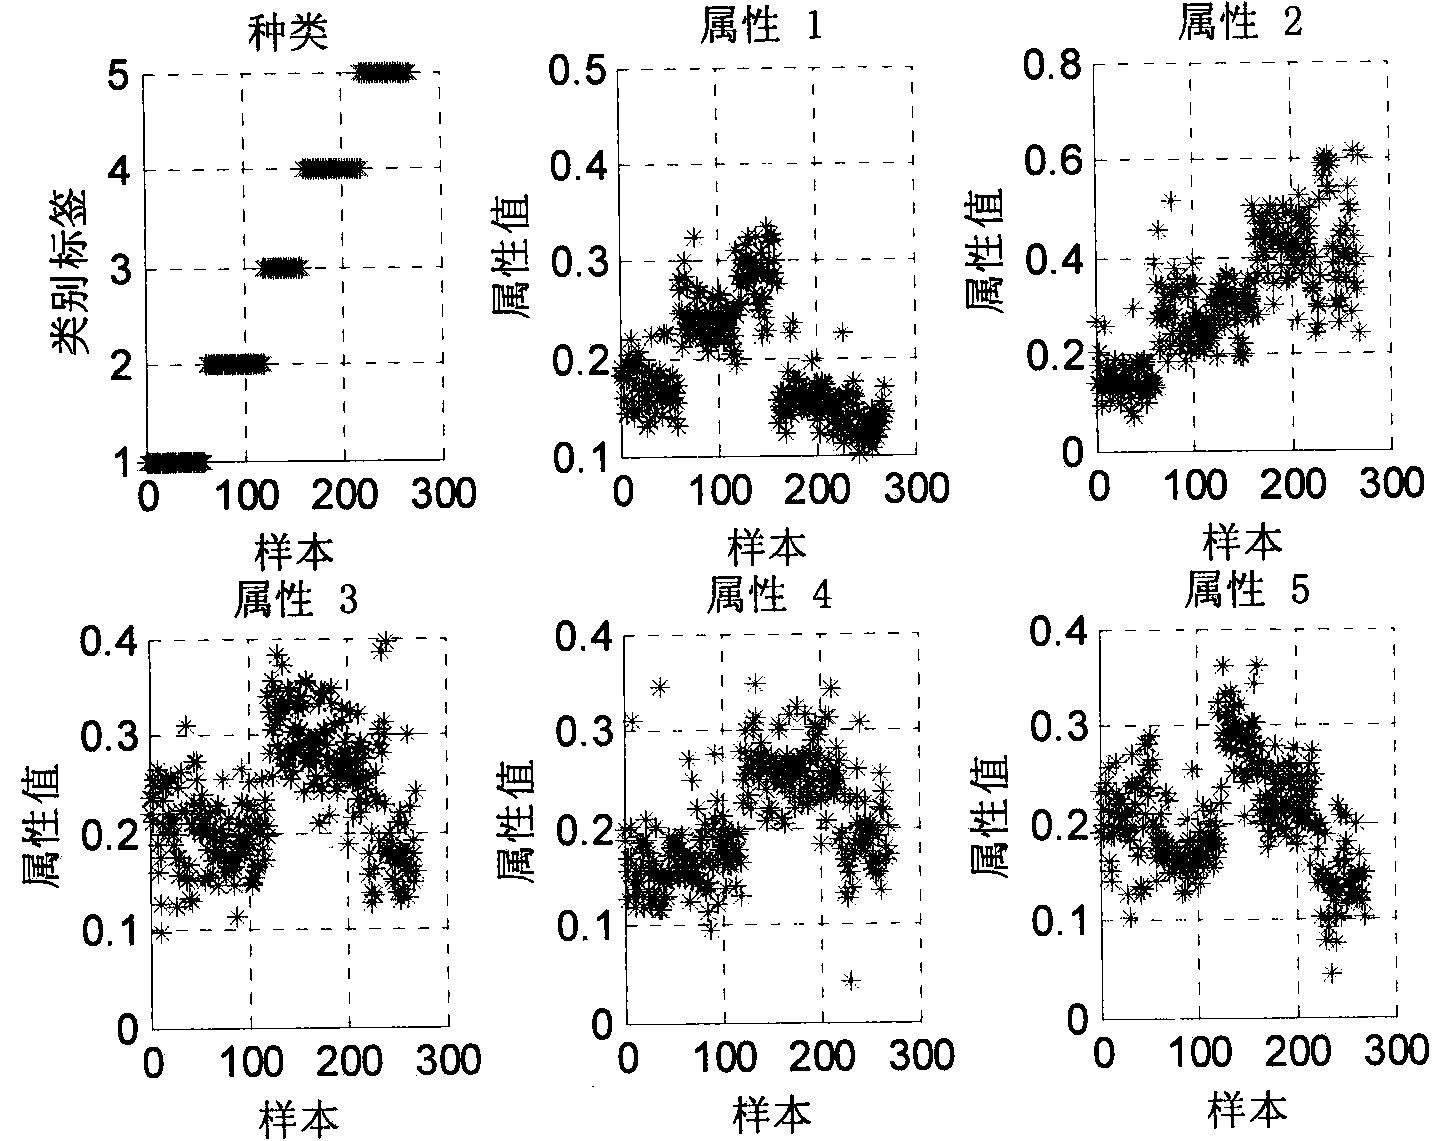 ECG signal classifying method based on wavelet packet and approximate entropy